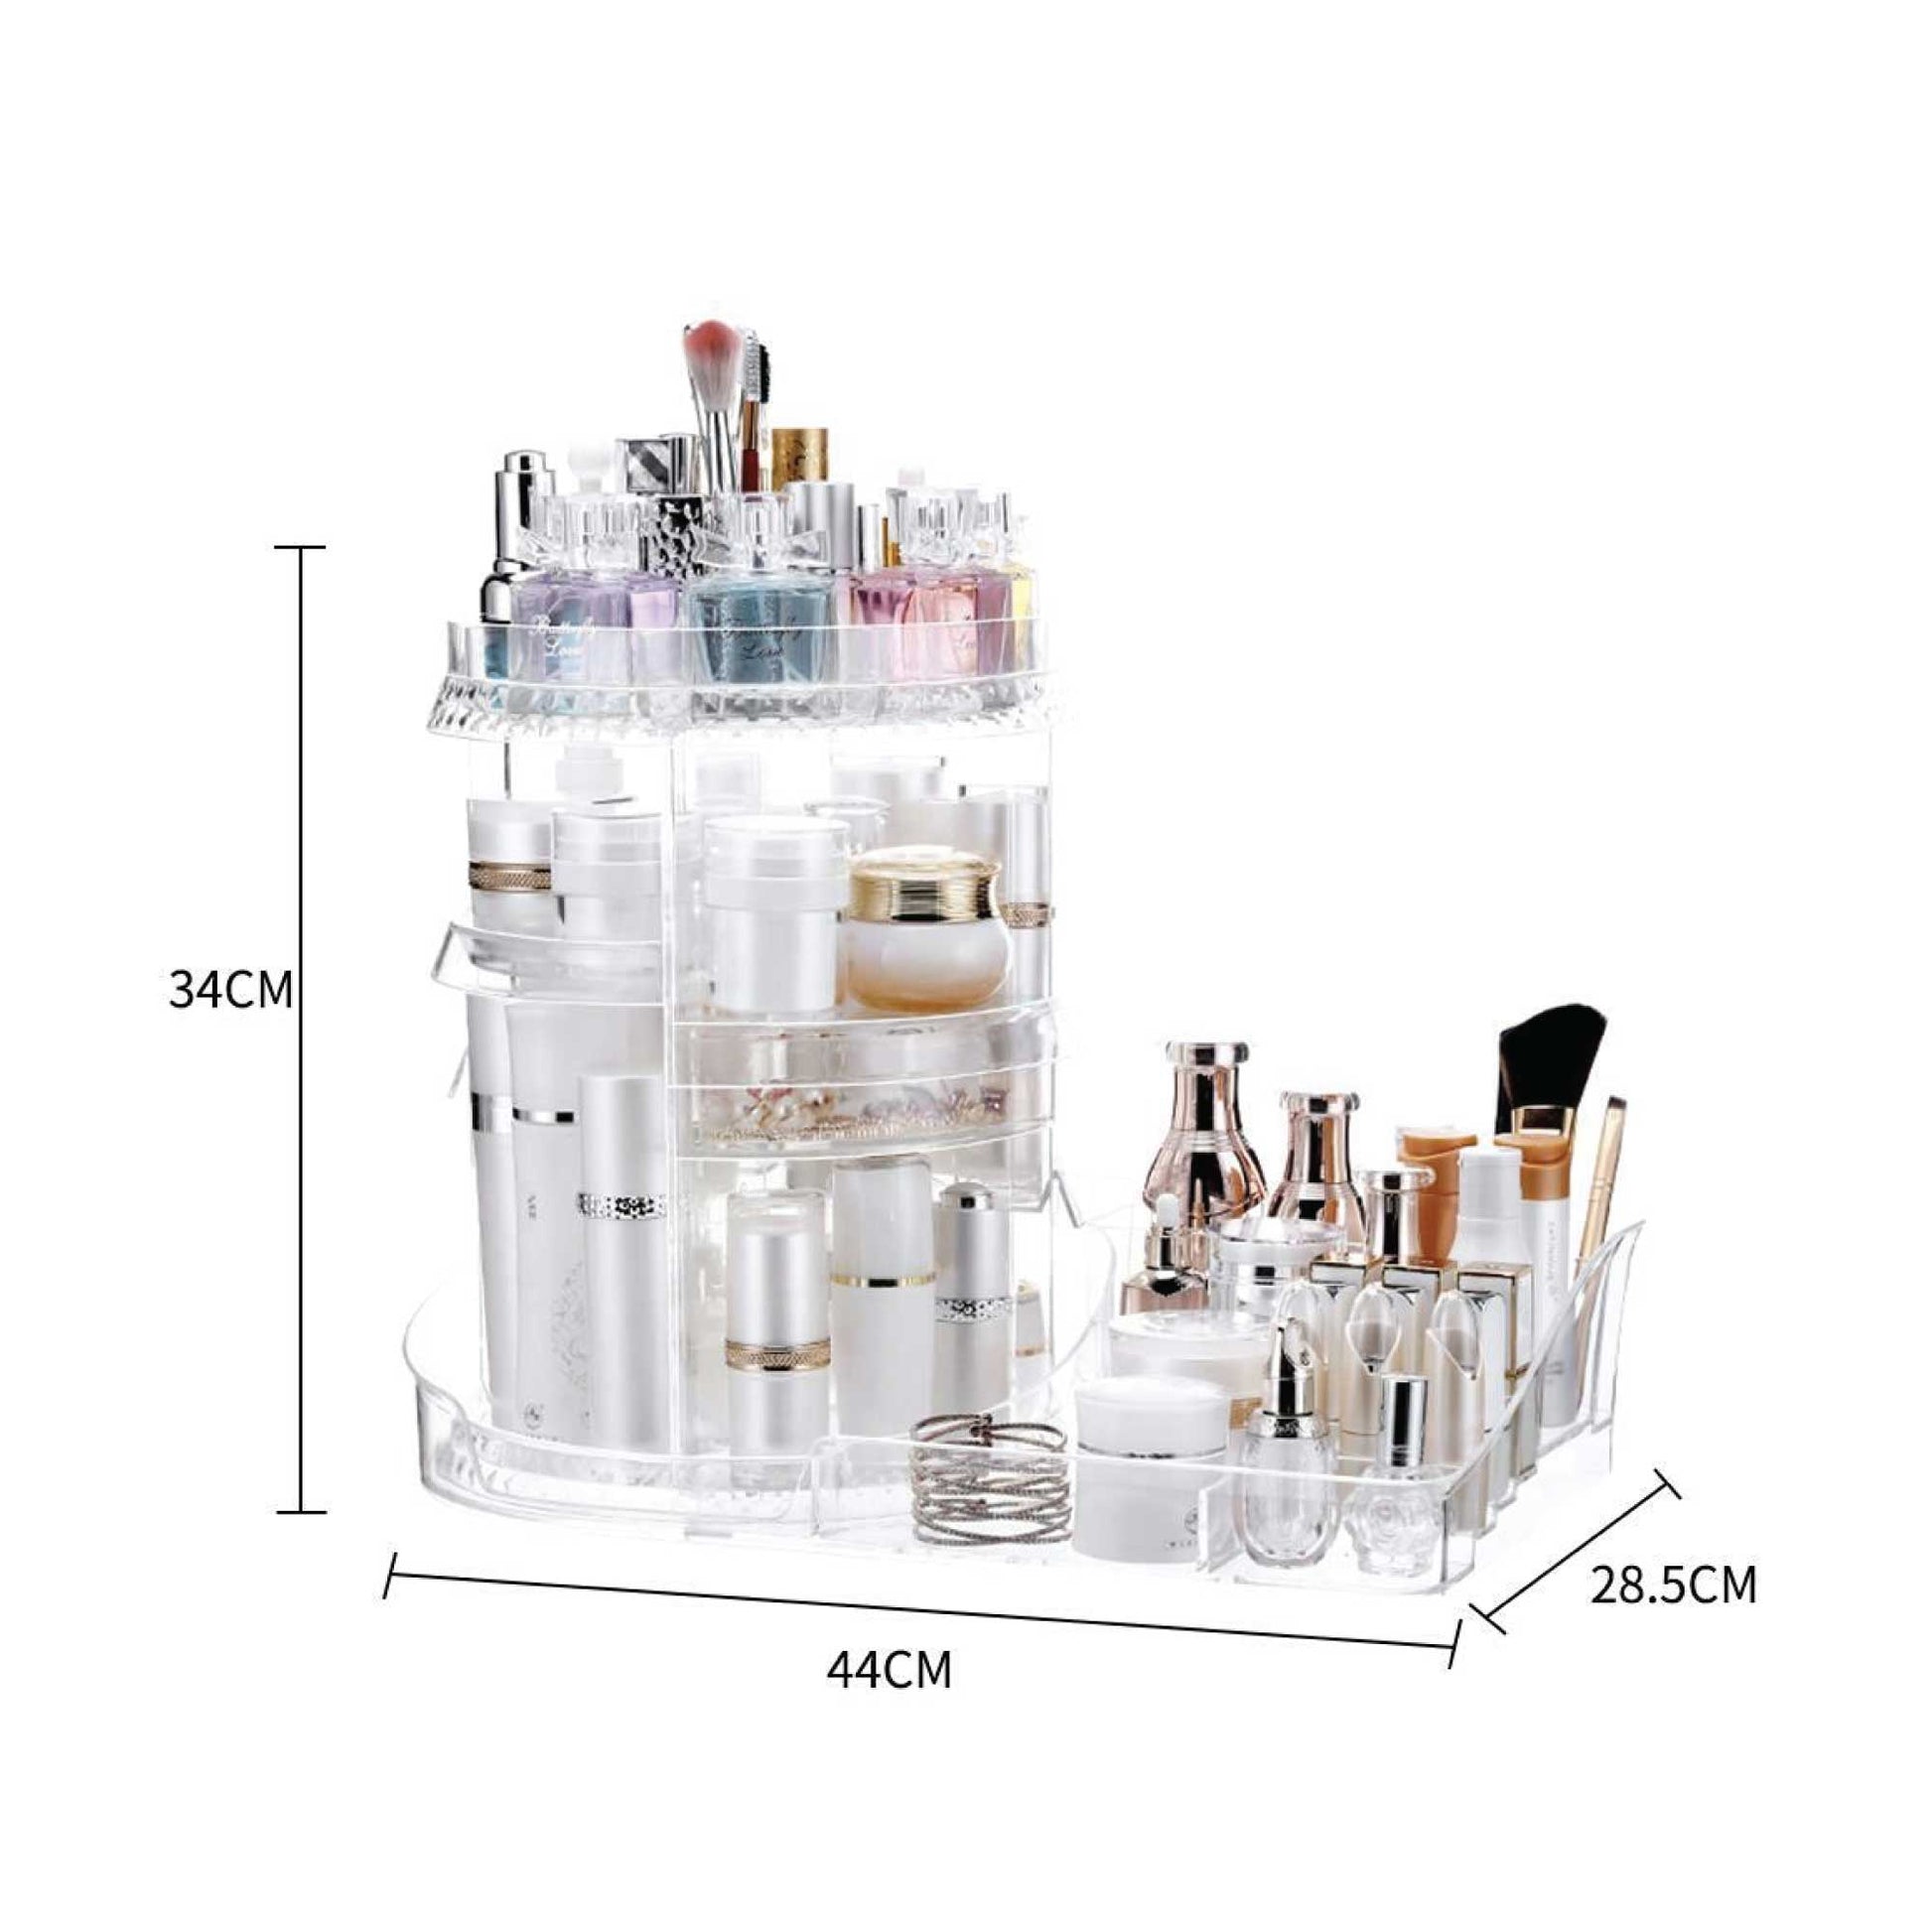 Makeup Organiser Rotating Stand - Cosmetic Storage Large Tiered Display Tray